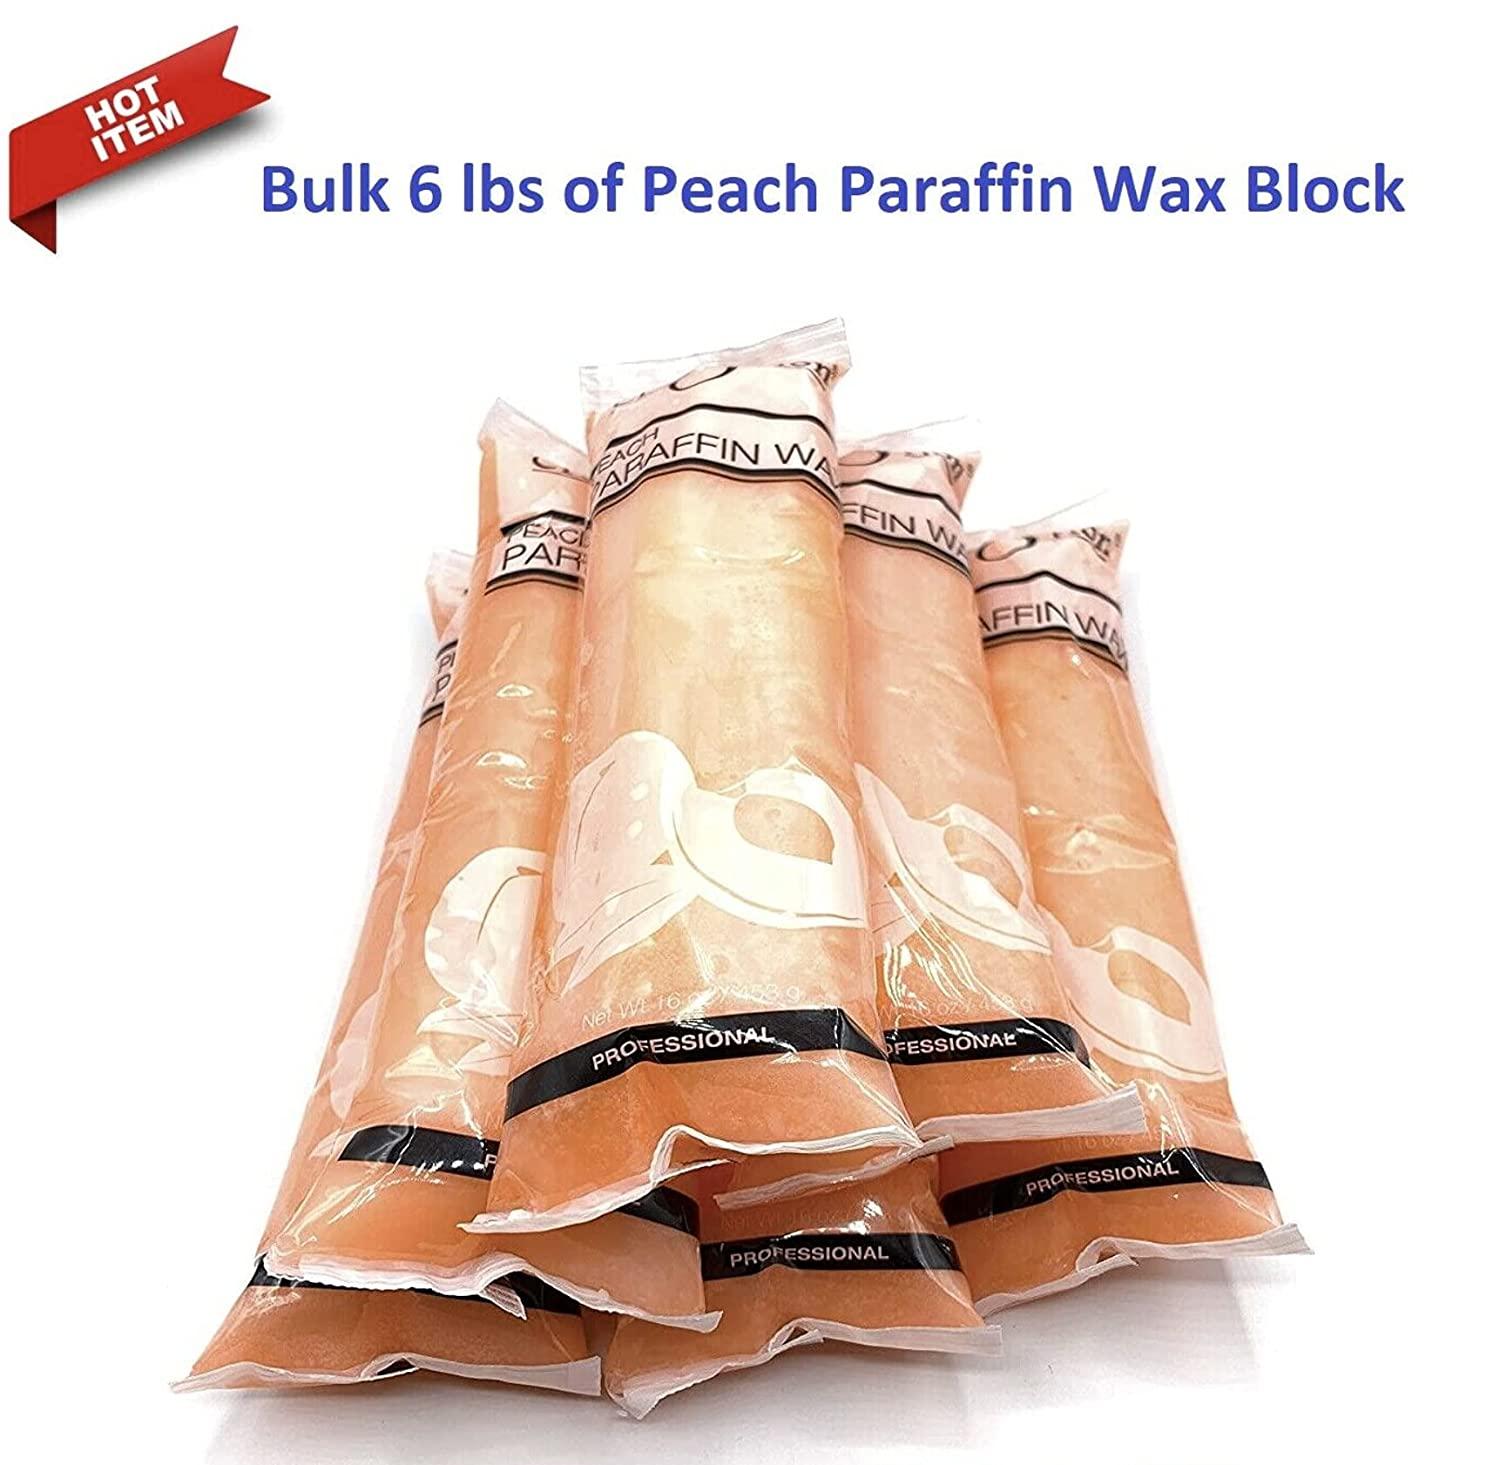 Paraffin Wax Refills by Creation: Bulk 6 lbs of Peach Paraffin Wax Block,  Use in Paraffin Wax Machine for hand and feet, Paraffin Wax Bath, Relieve  Arthritis Pain Stiff Muscles Deeply Hydrates